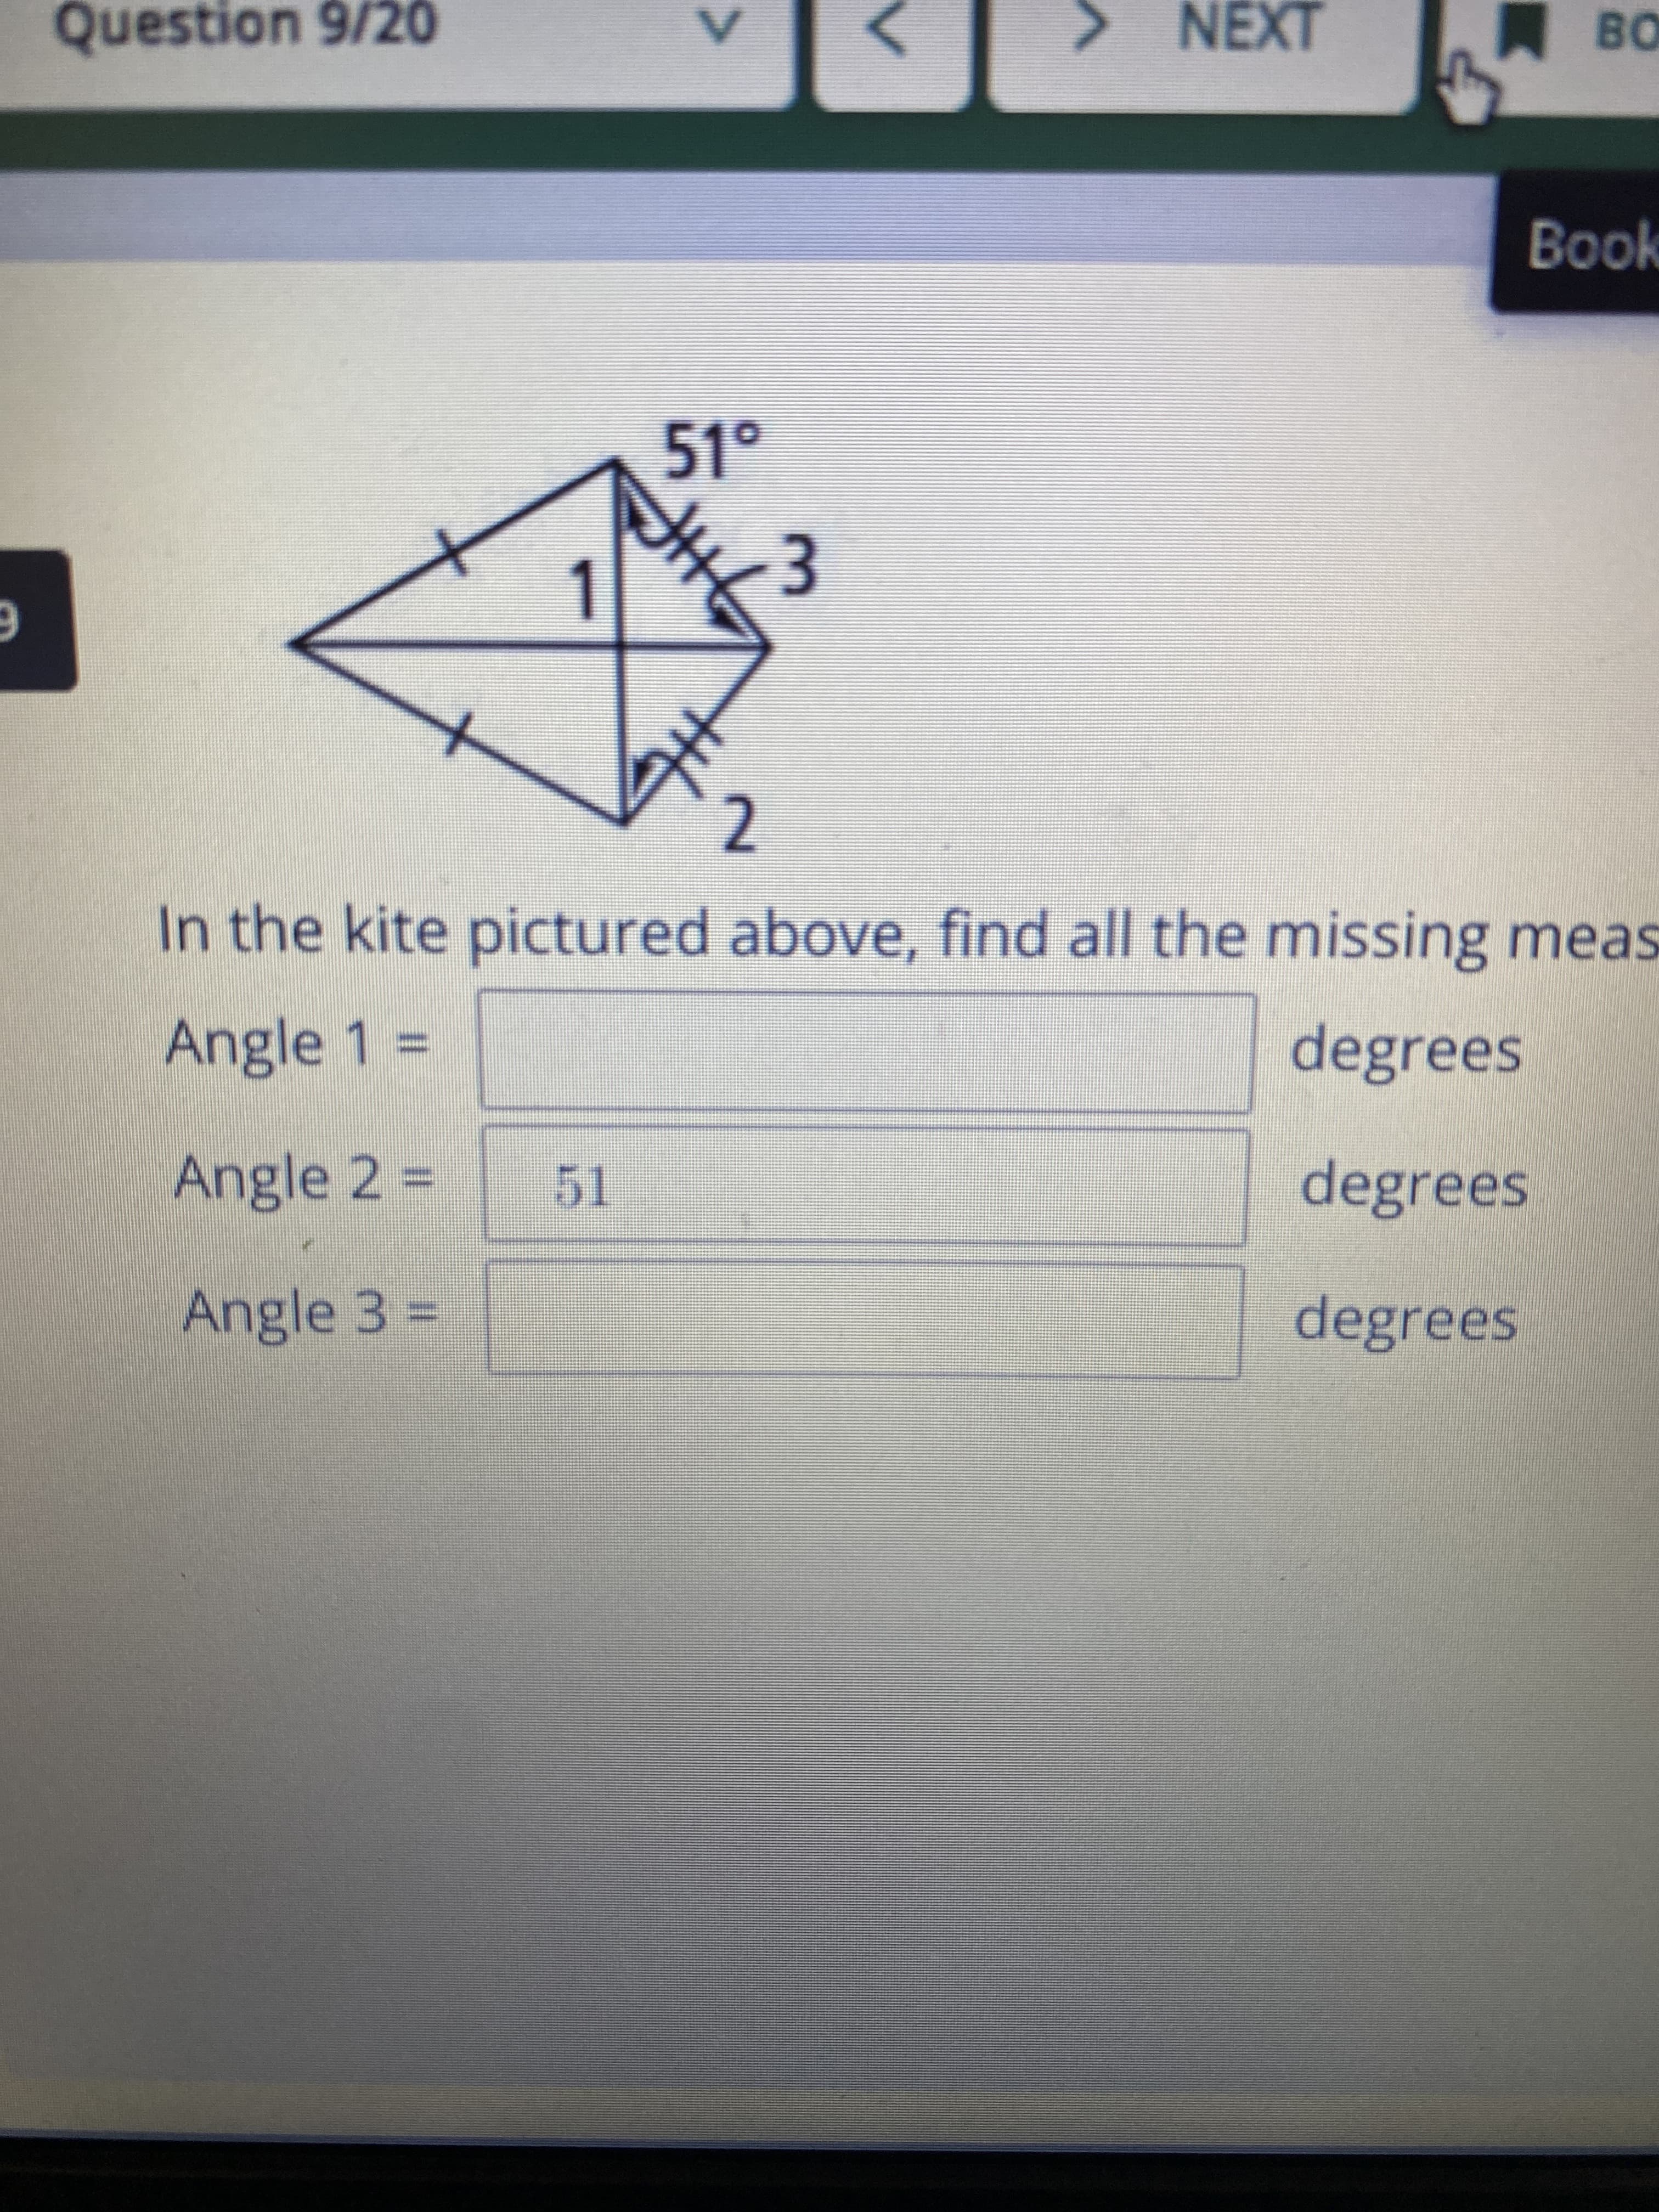 3.
Question 9/20
NEXT
Book
51°
1.
2.
In the kite pictured above, find all the missing meas
Angle 1% =
degrees
Angle 2 D
degrees
51
Angle 3 D
degrees
